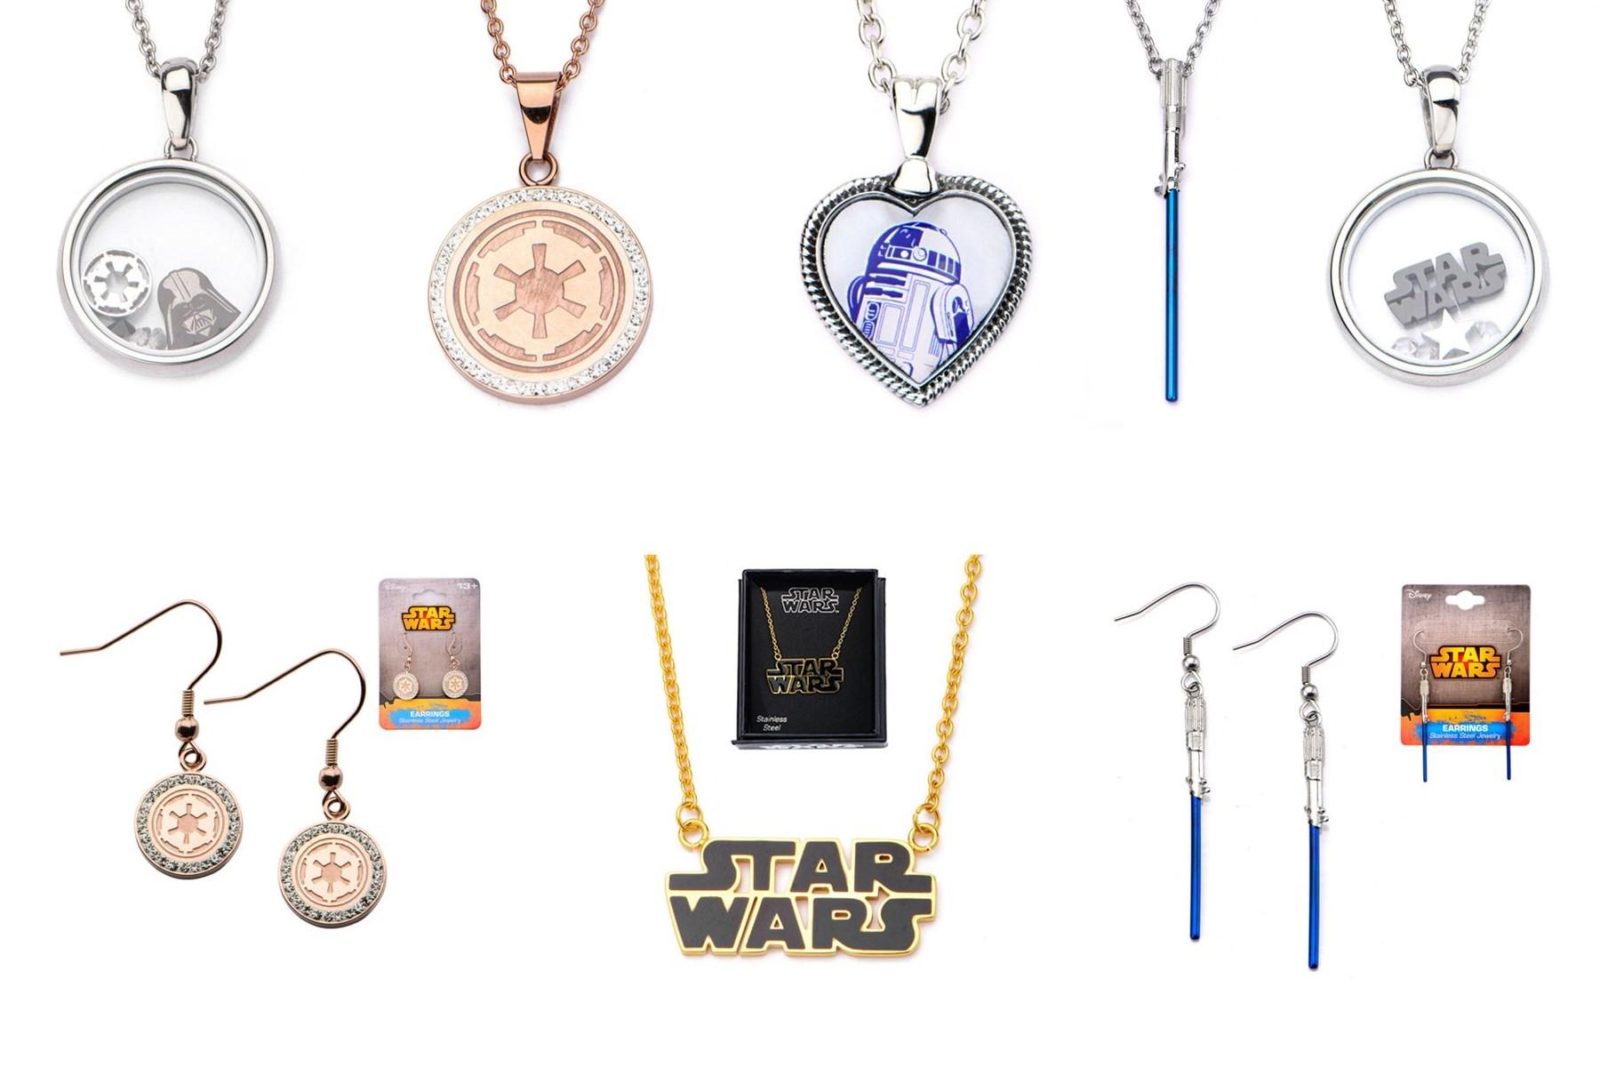 New jewelry at Entertainment Earth